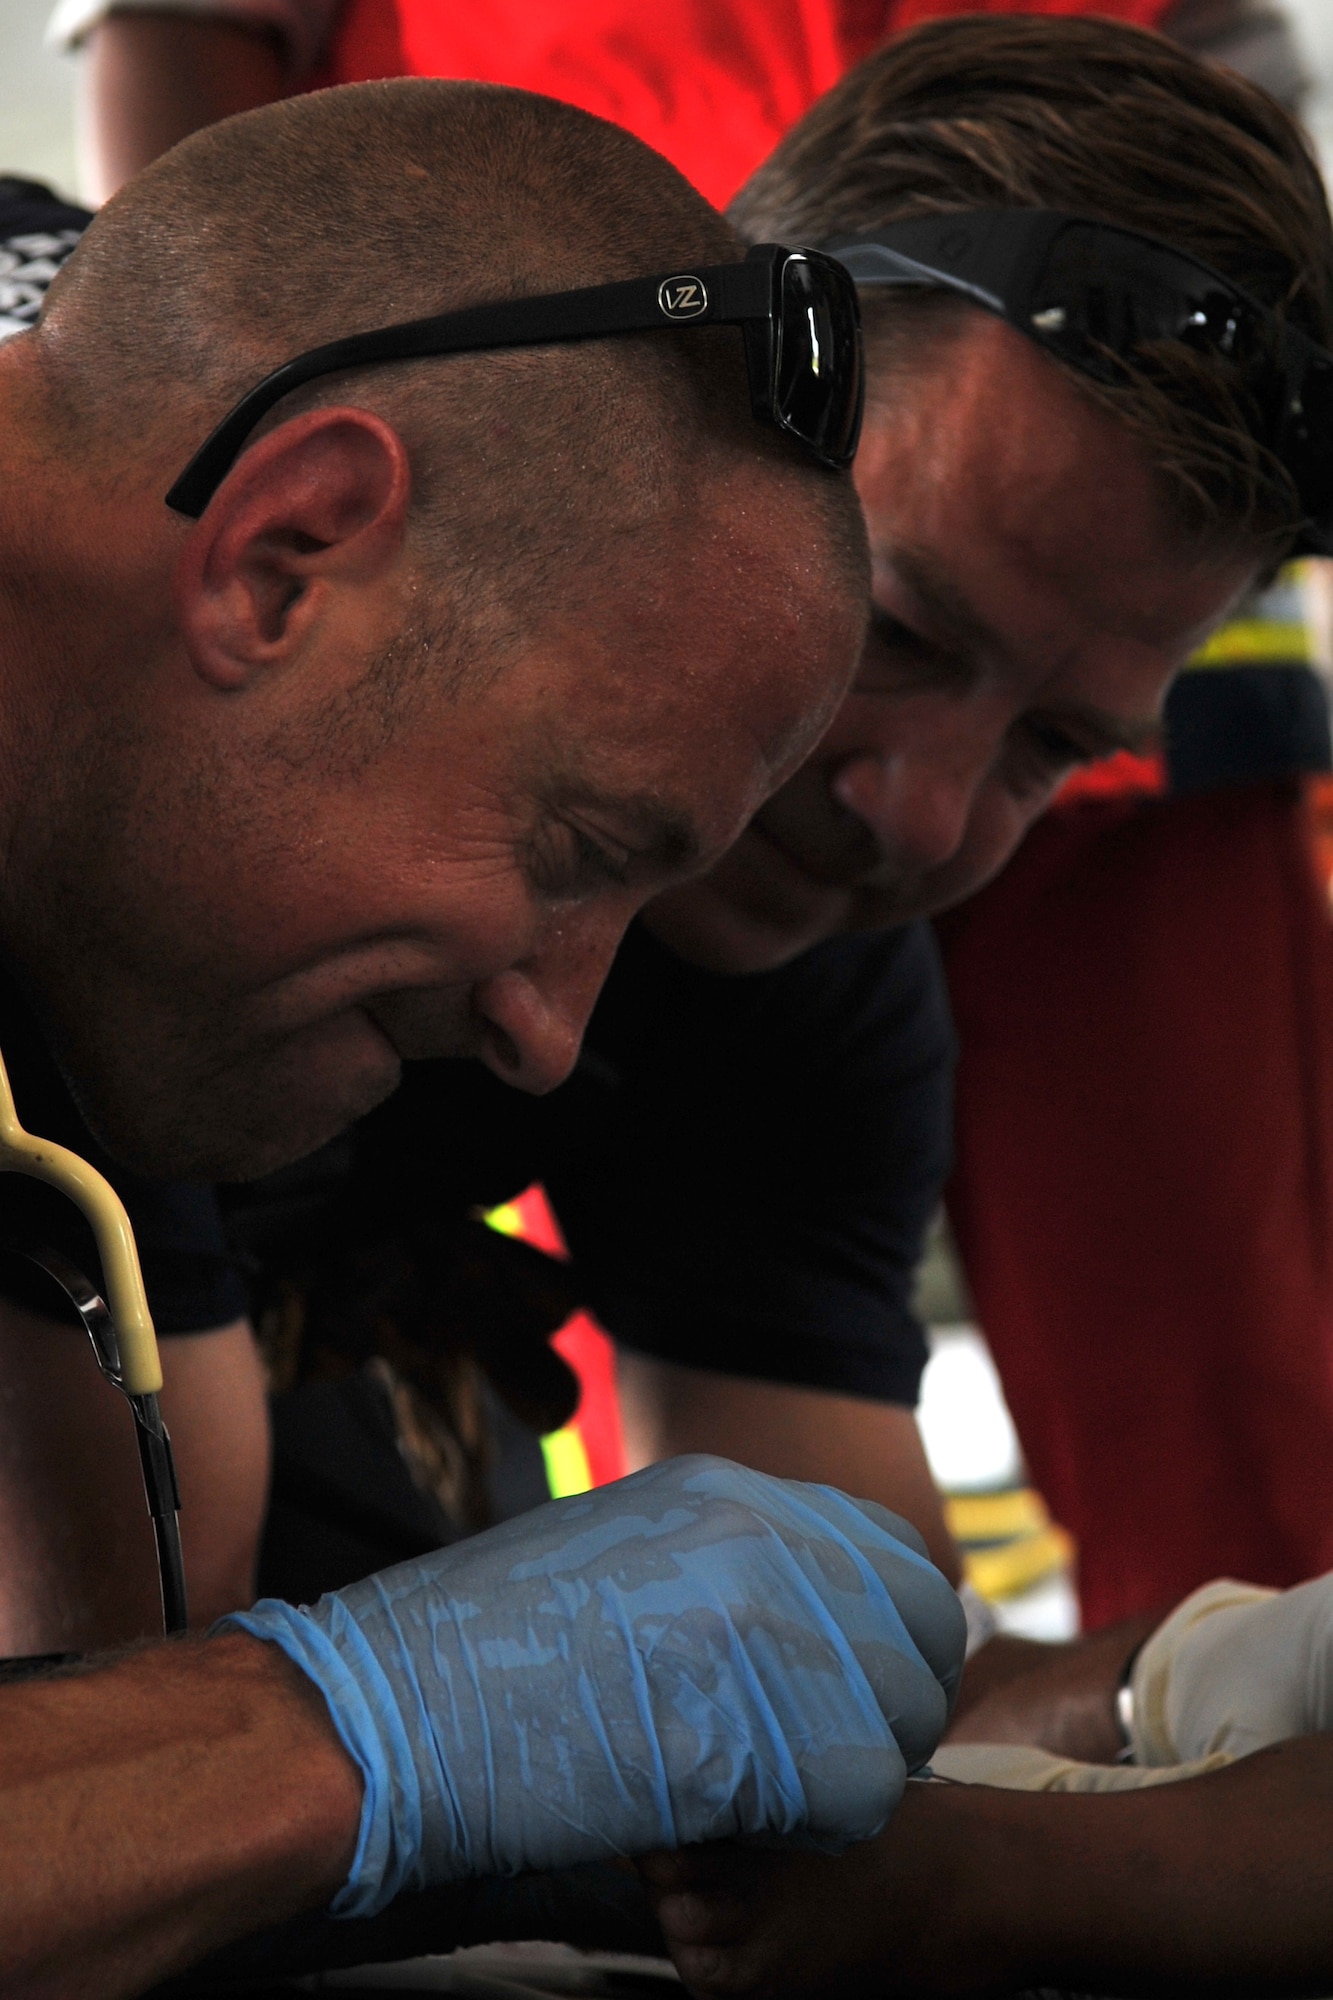 J.P. Reardon (left) and Steve Strott, both U.S. Agency for International Development firefighter paramedics, treat an earthquake victim at the Tribhuvan International Airport in Kathmandu, Nepal, May 12, 2015. Joint Task Force-505 and USAID members worked with the Nepalese army to triage, treat and transport patients after a 7.3 magnitude earthquake struck the same day following a 7.8 magnitude earthquake that devastated the nation April 25, 2015. (U.S. Air Force photo by Staff Sgt. Melissa B. White/Released)